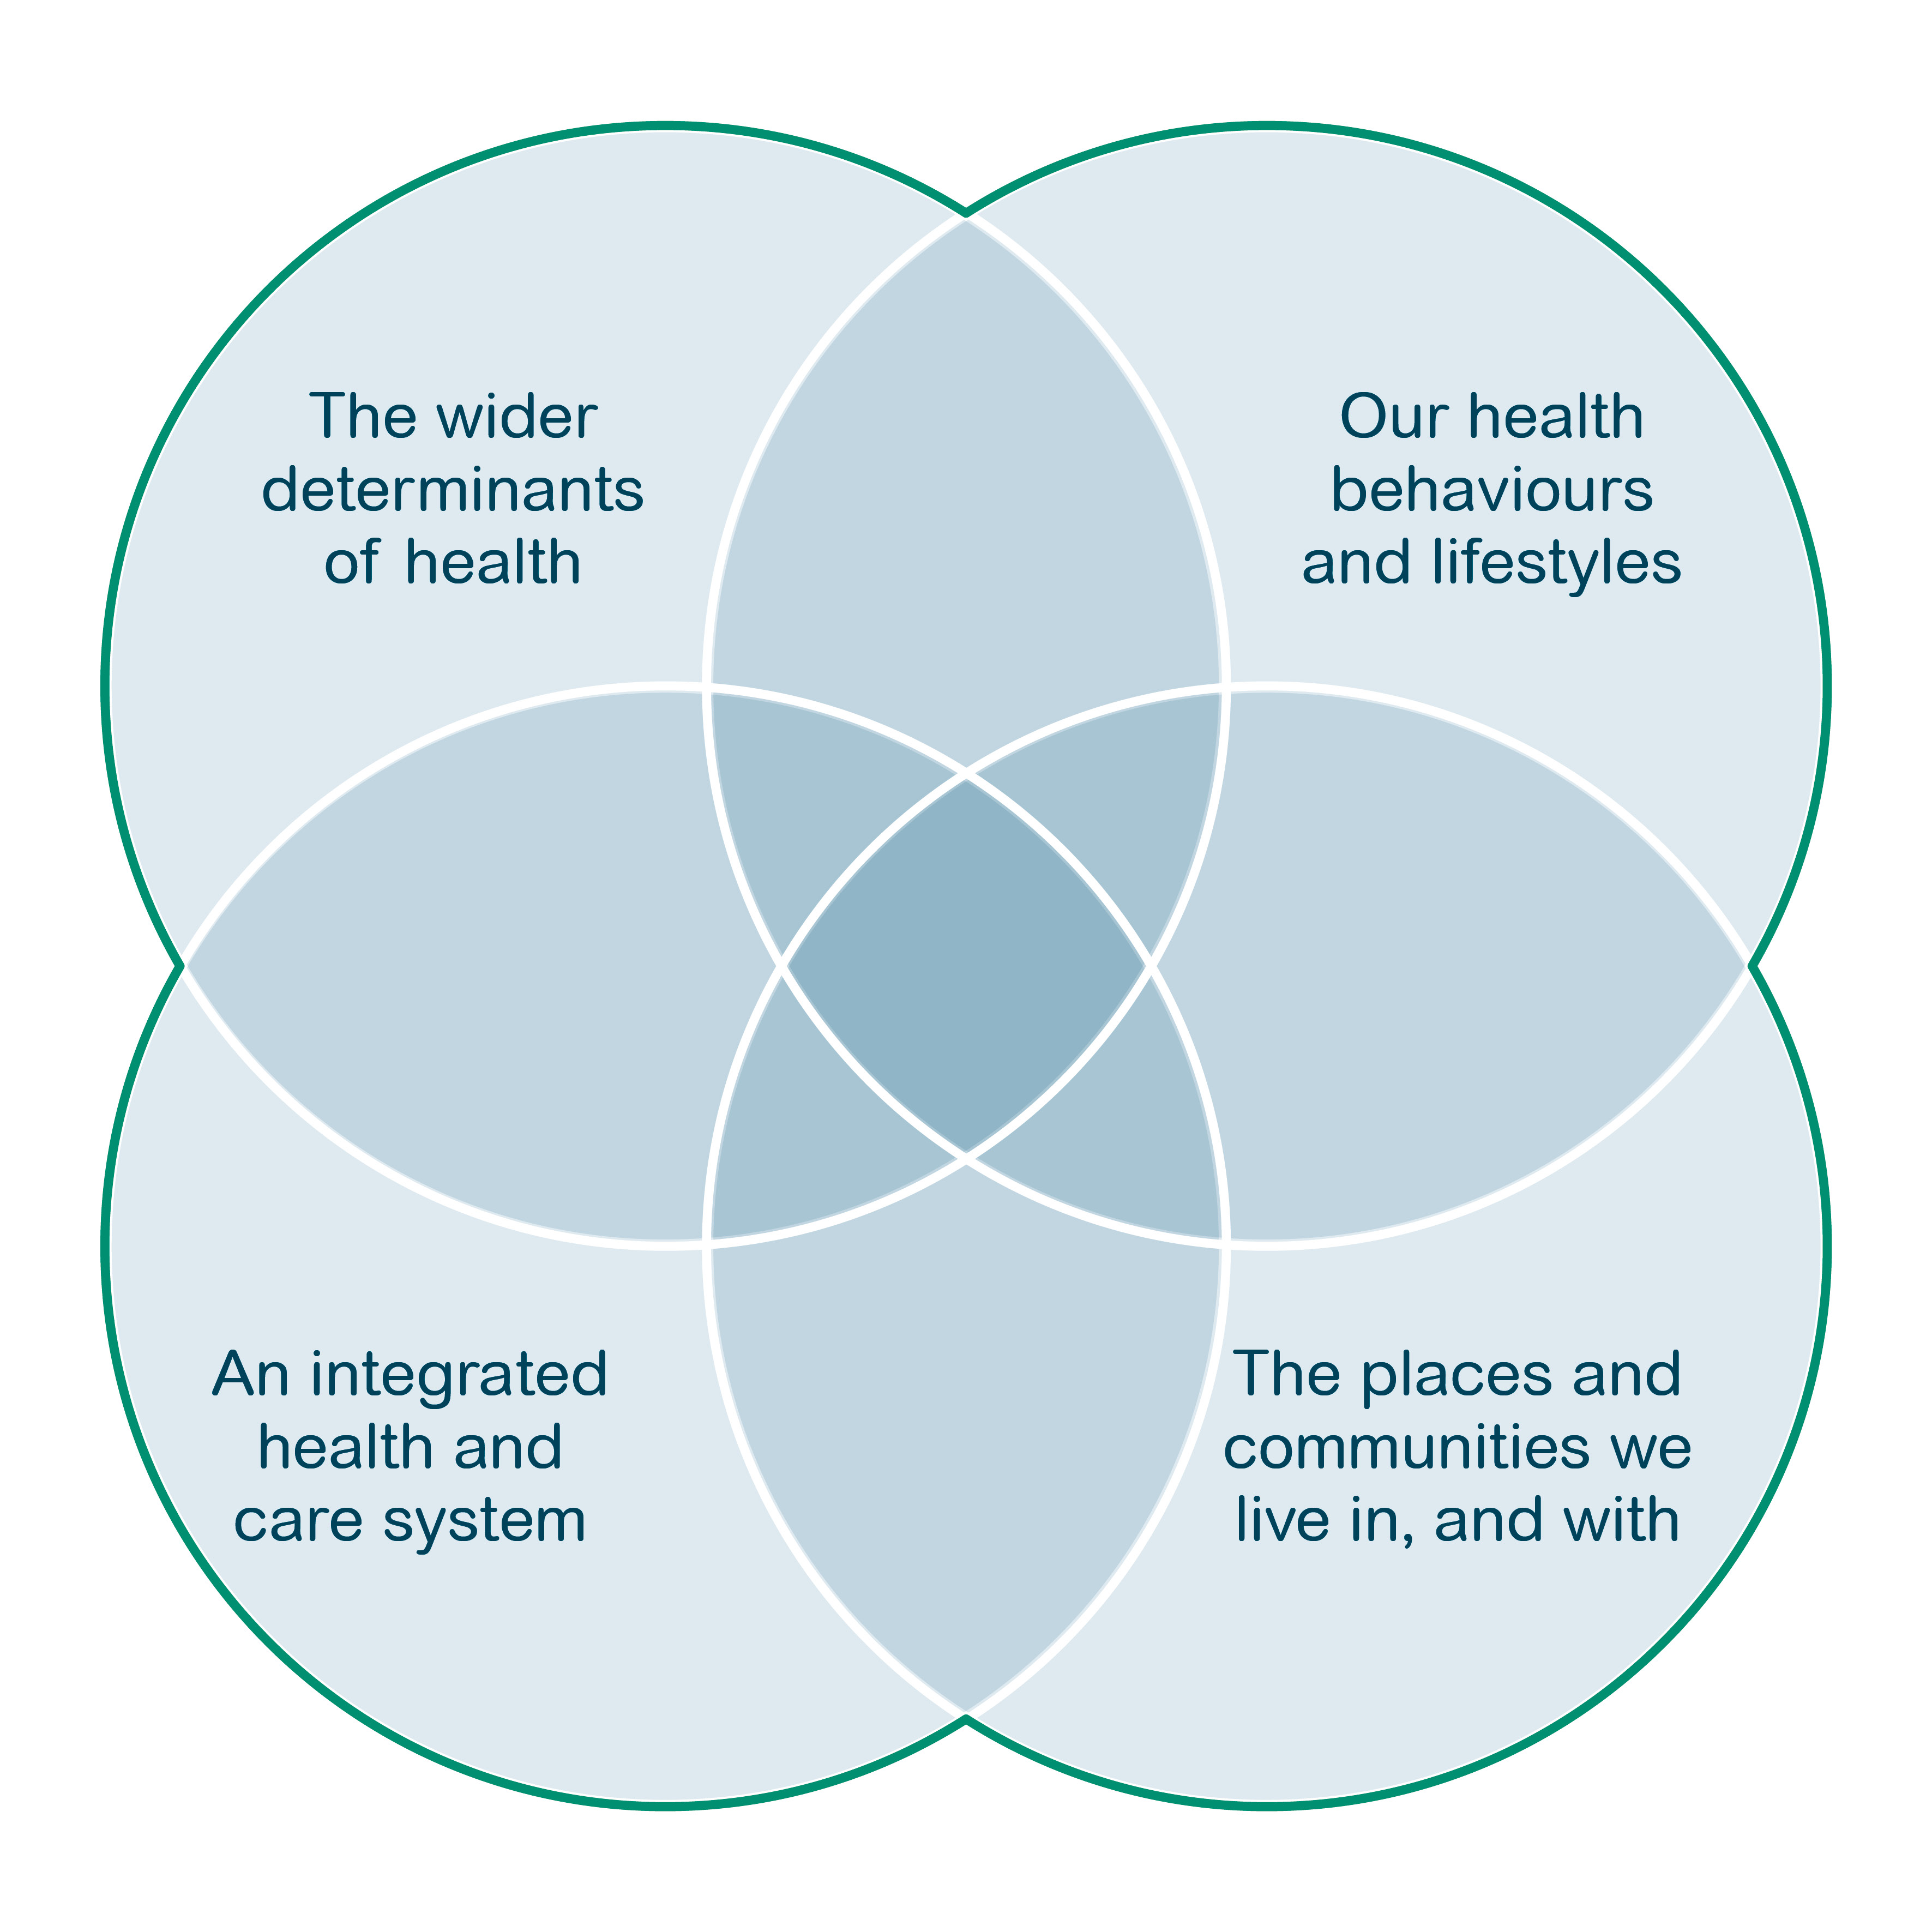 Venn dagram which shows overlapping nature of 'the wider determinants of health, our health behaviours and lifestyles, the places and communities we live in and with and an integrated health and care system'